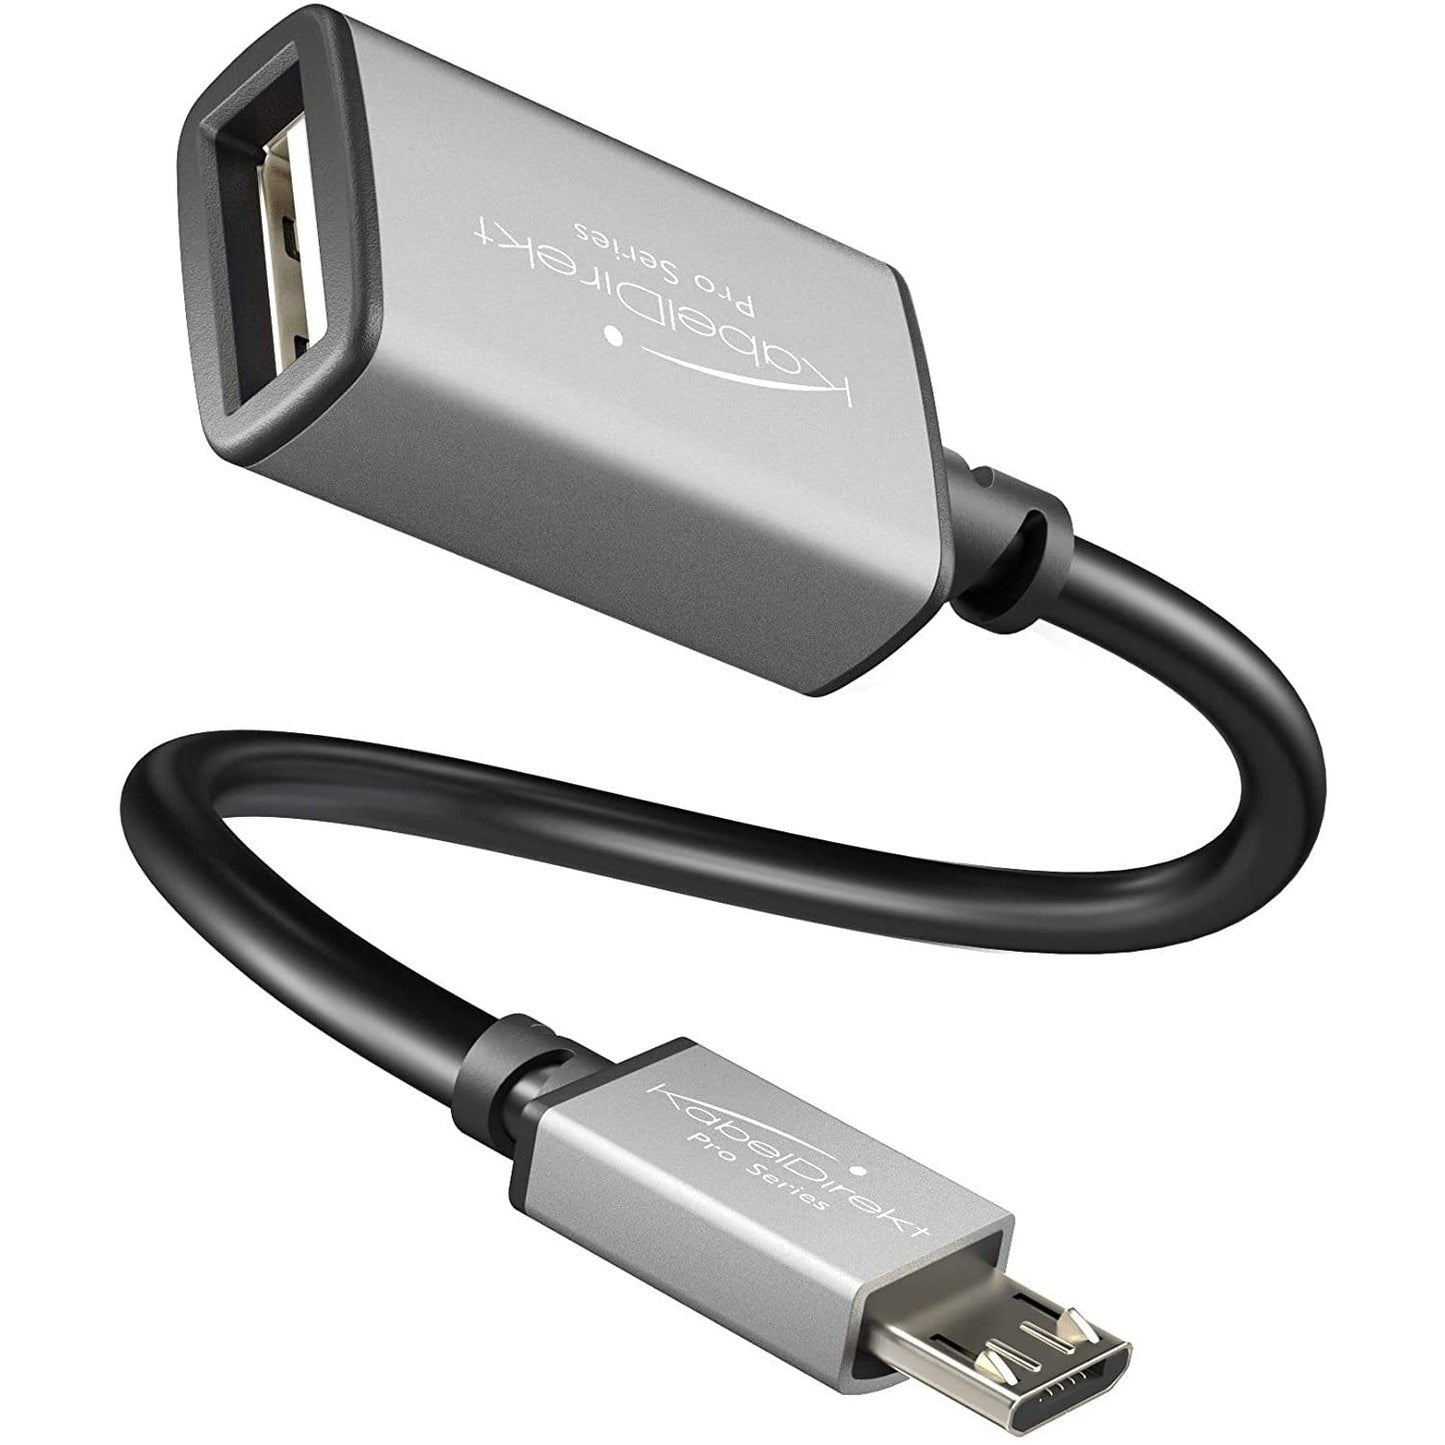 USB-C OTG adapter cable –Connect any USB-A device to your tablet, notebook or smartphone